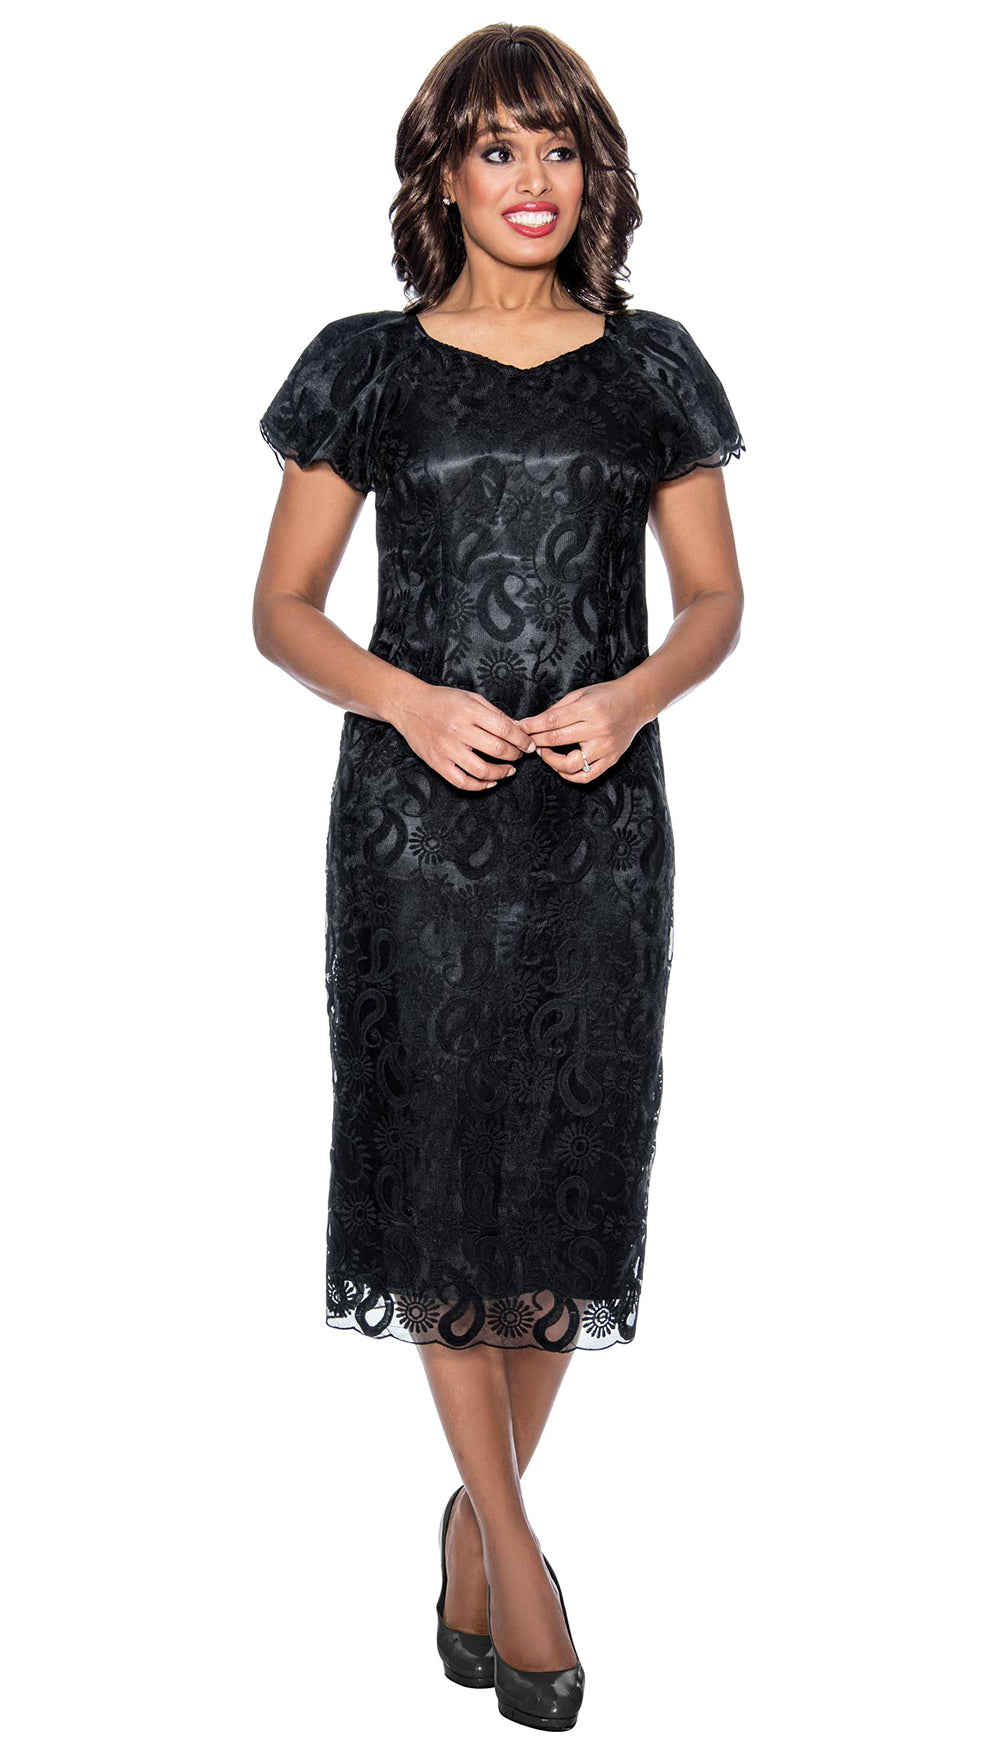 Church Dress By Nubiano 1231C-Black - Church Suits For Less